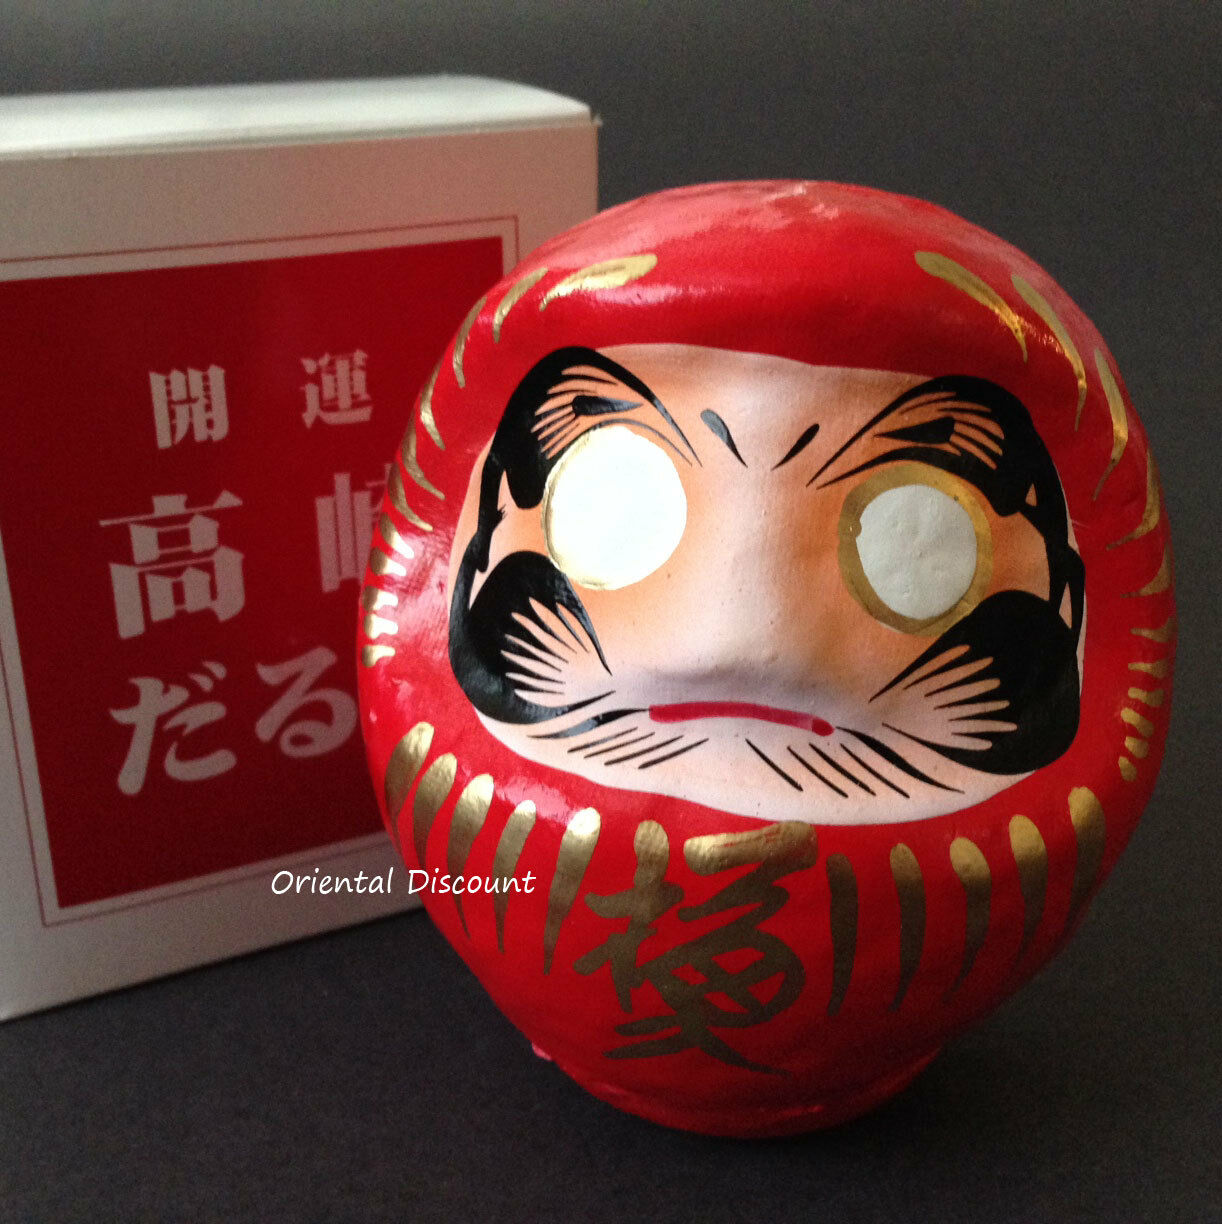 Japanese 3.75"h Red Daruma Doll For Luck & Good Fortune Success, Made In Japan